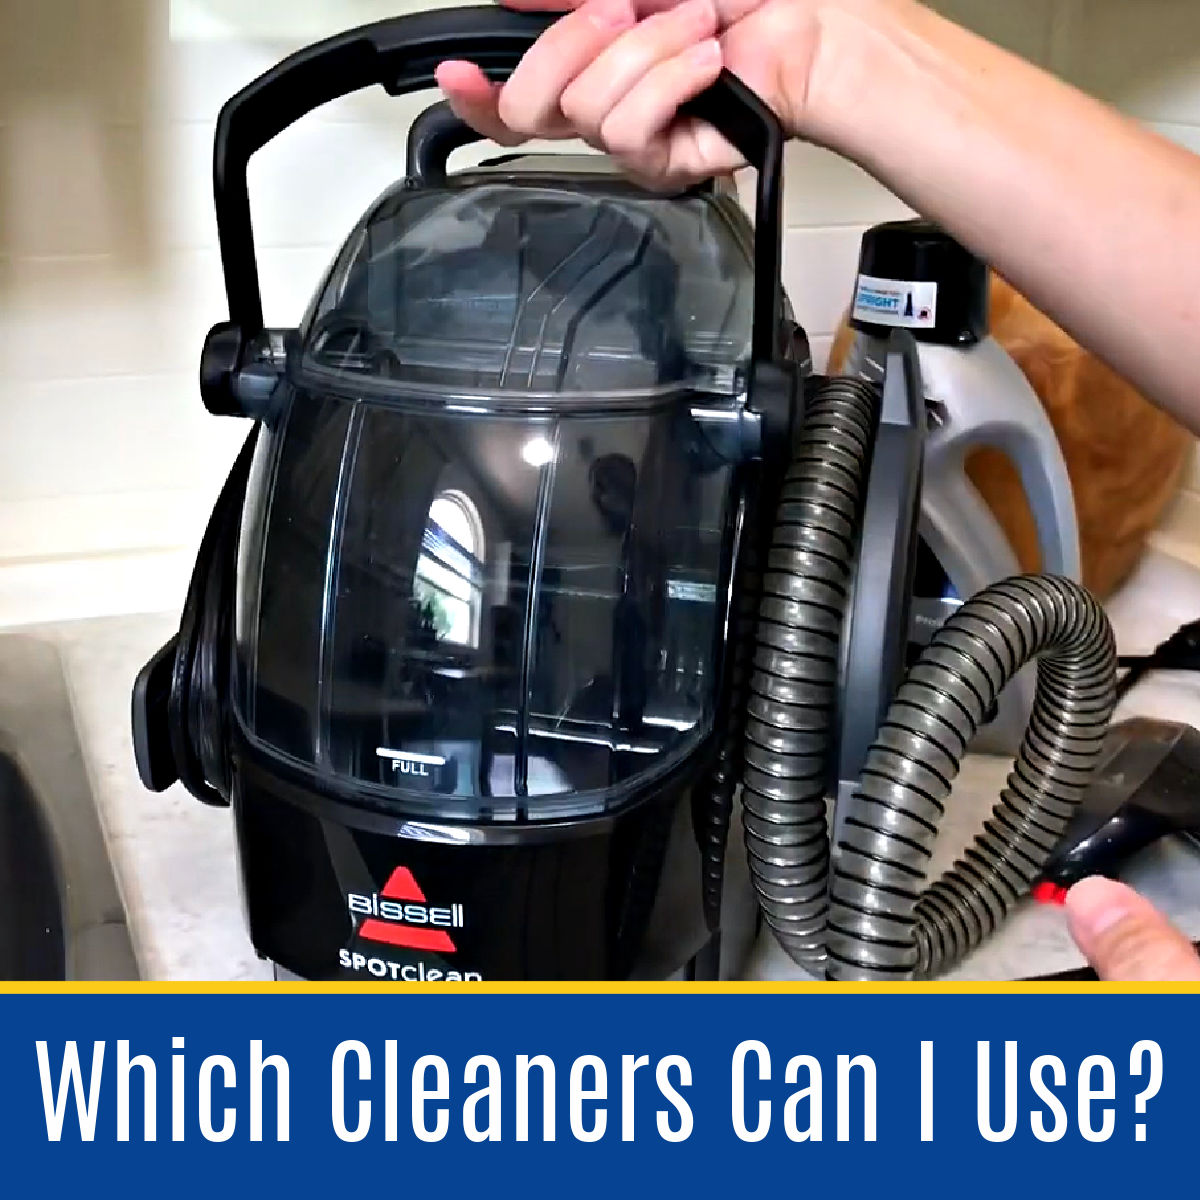 What To Use In A Bissell Spot Cleaner: 6 Best Alternatives